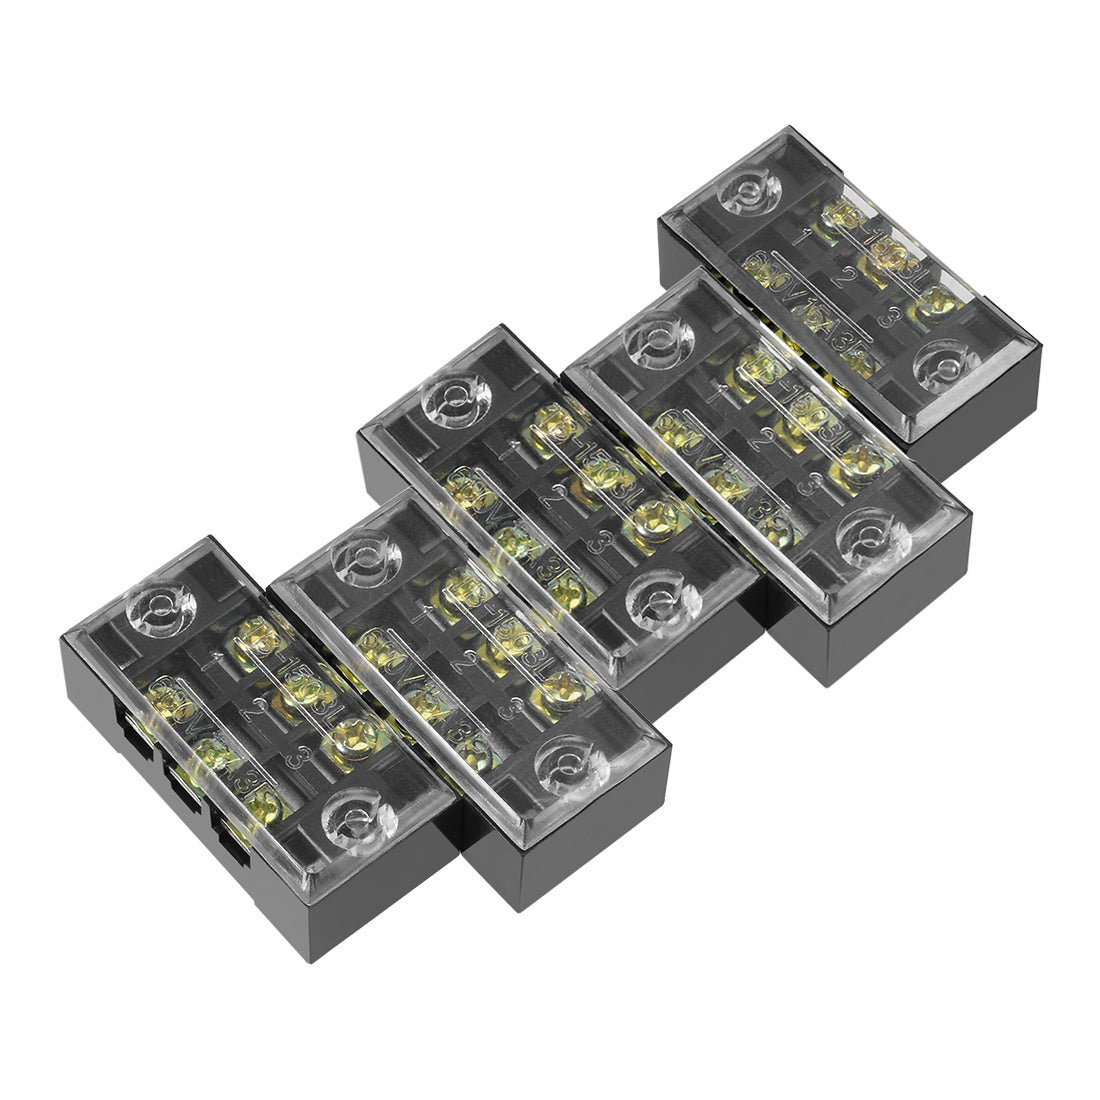 uxcell Uxcell 5 Pcs Dual Rows 3 Positions 600V 15A Cable Barrier Block Terminal Strip TB-1503L